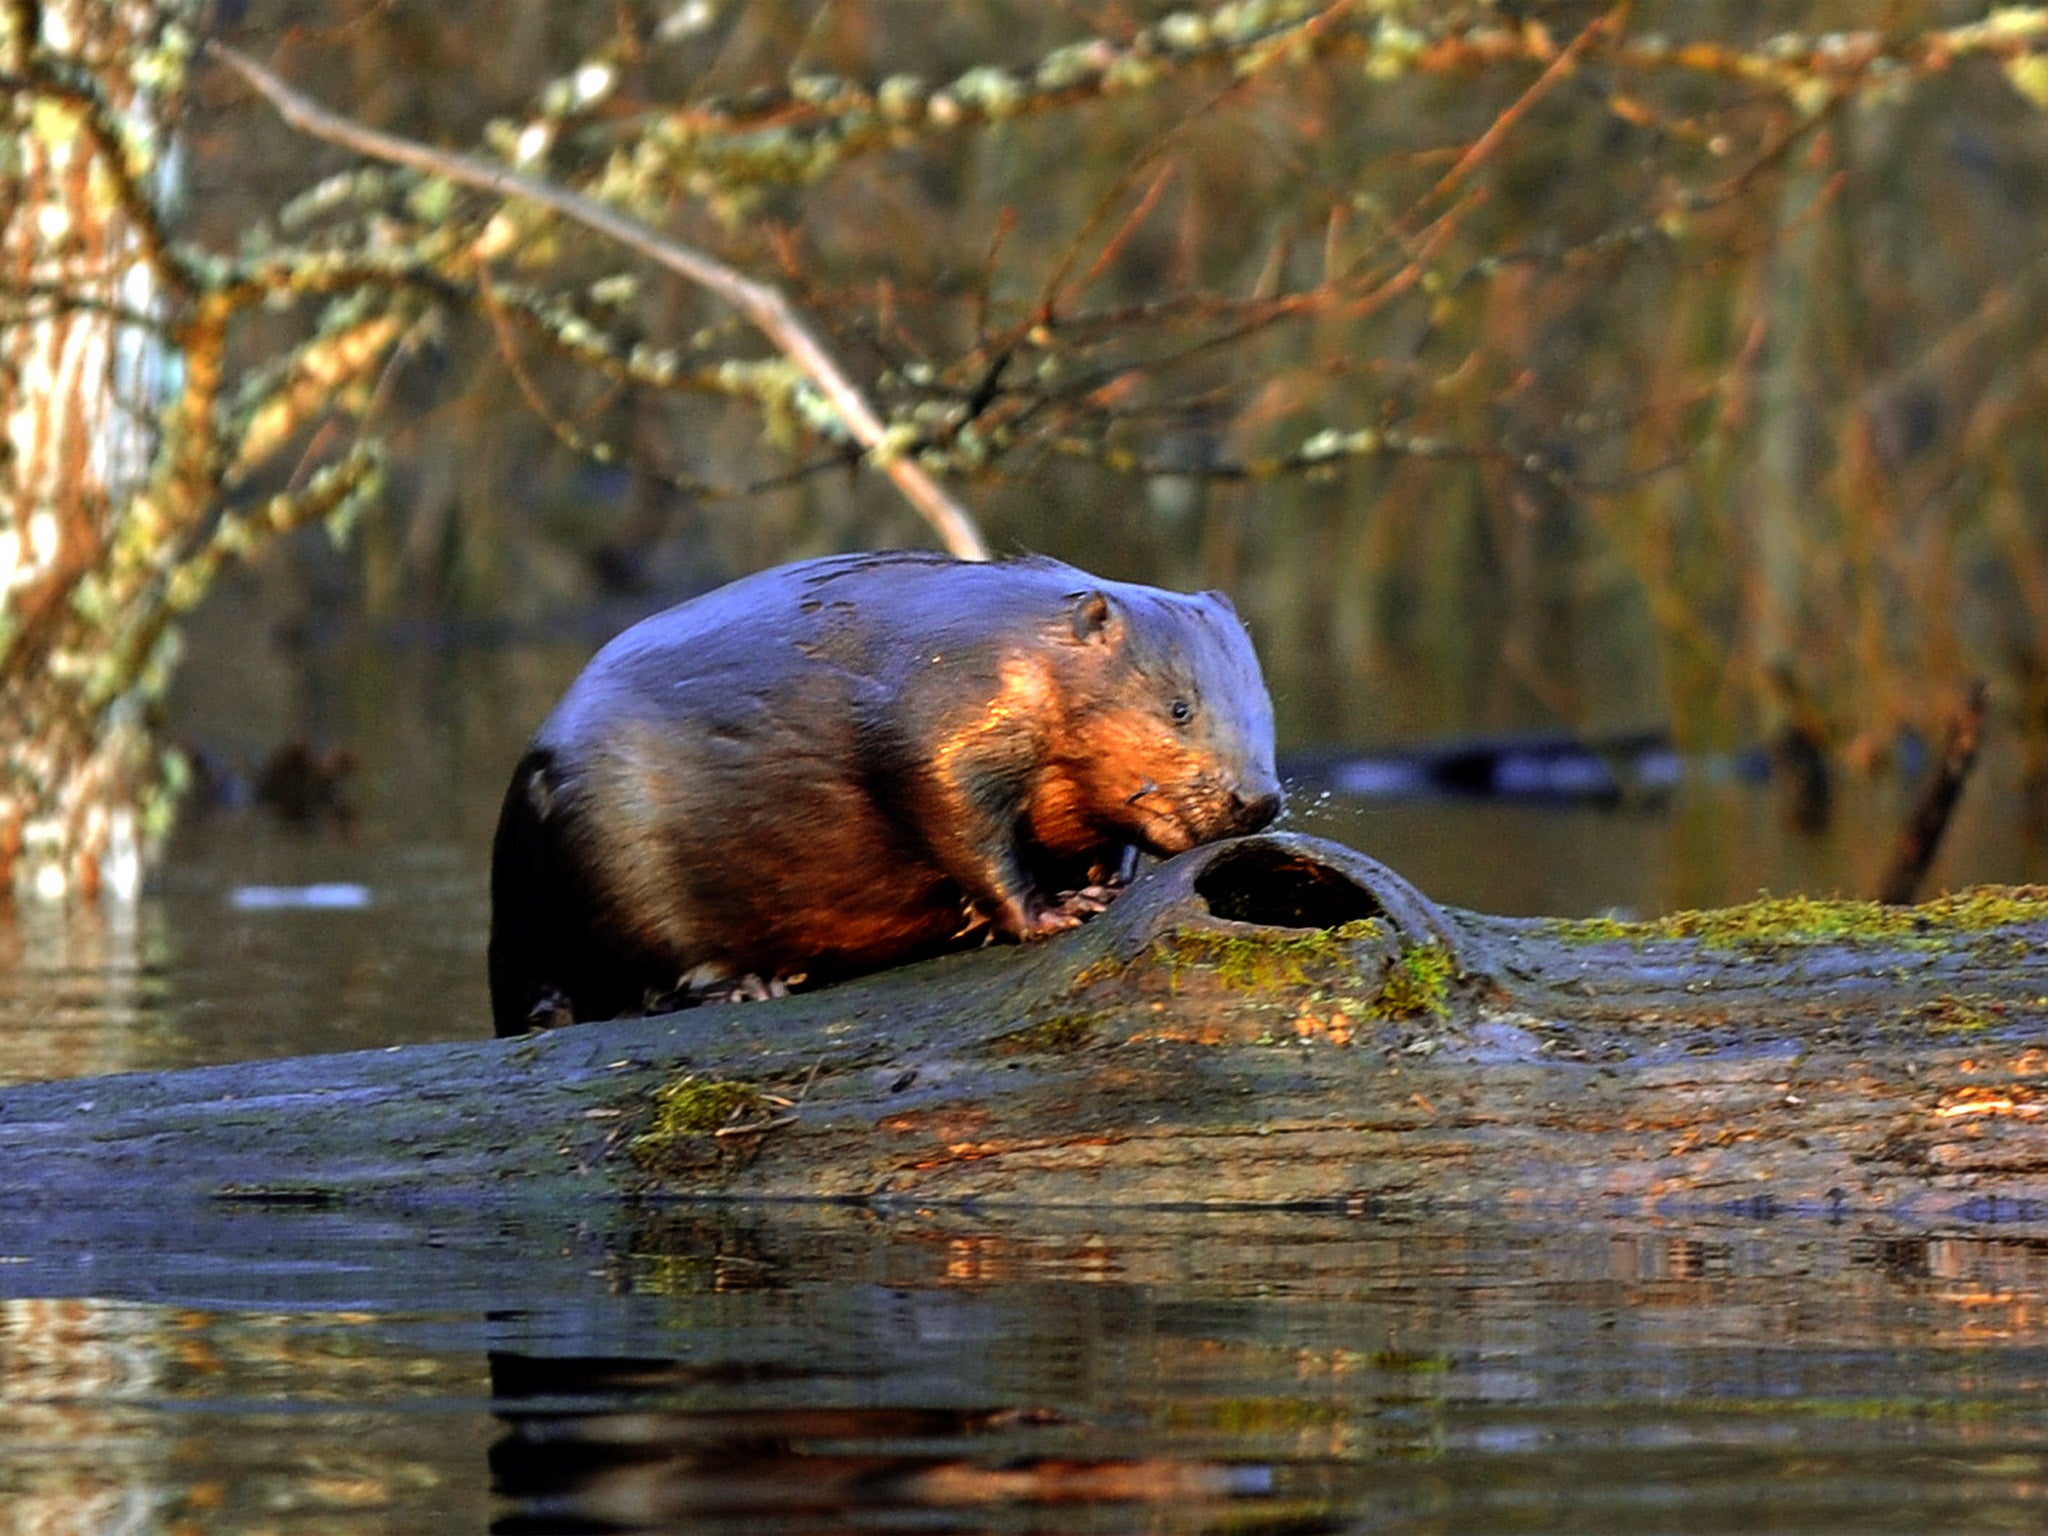 Beavers have been filmed in the River Otter – the first sighting in England for centuries